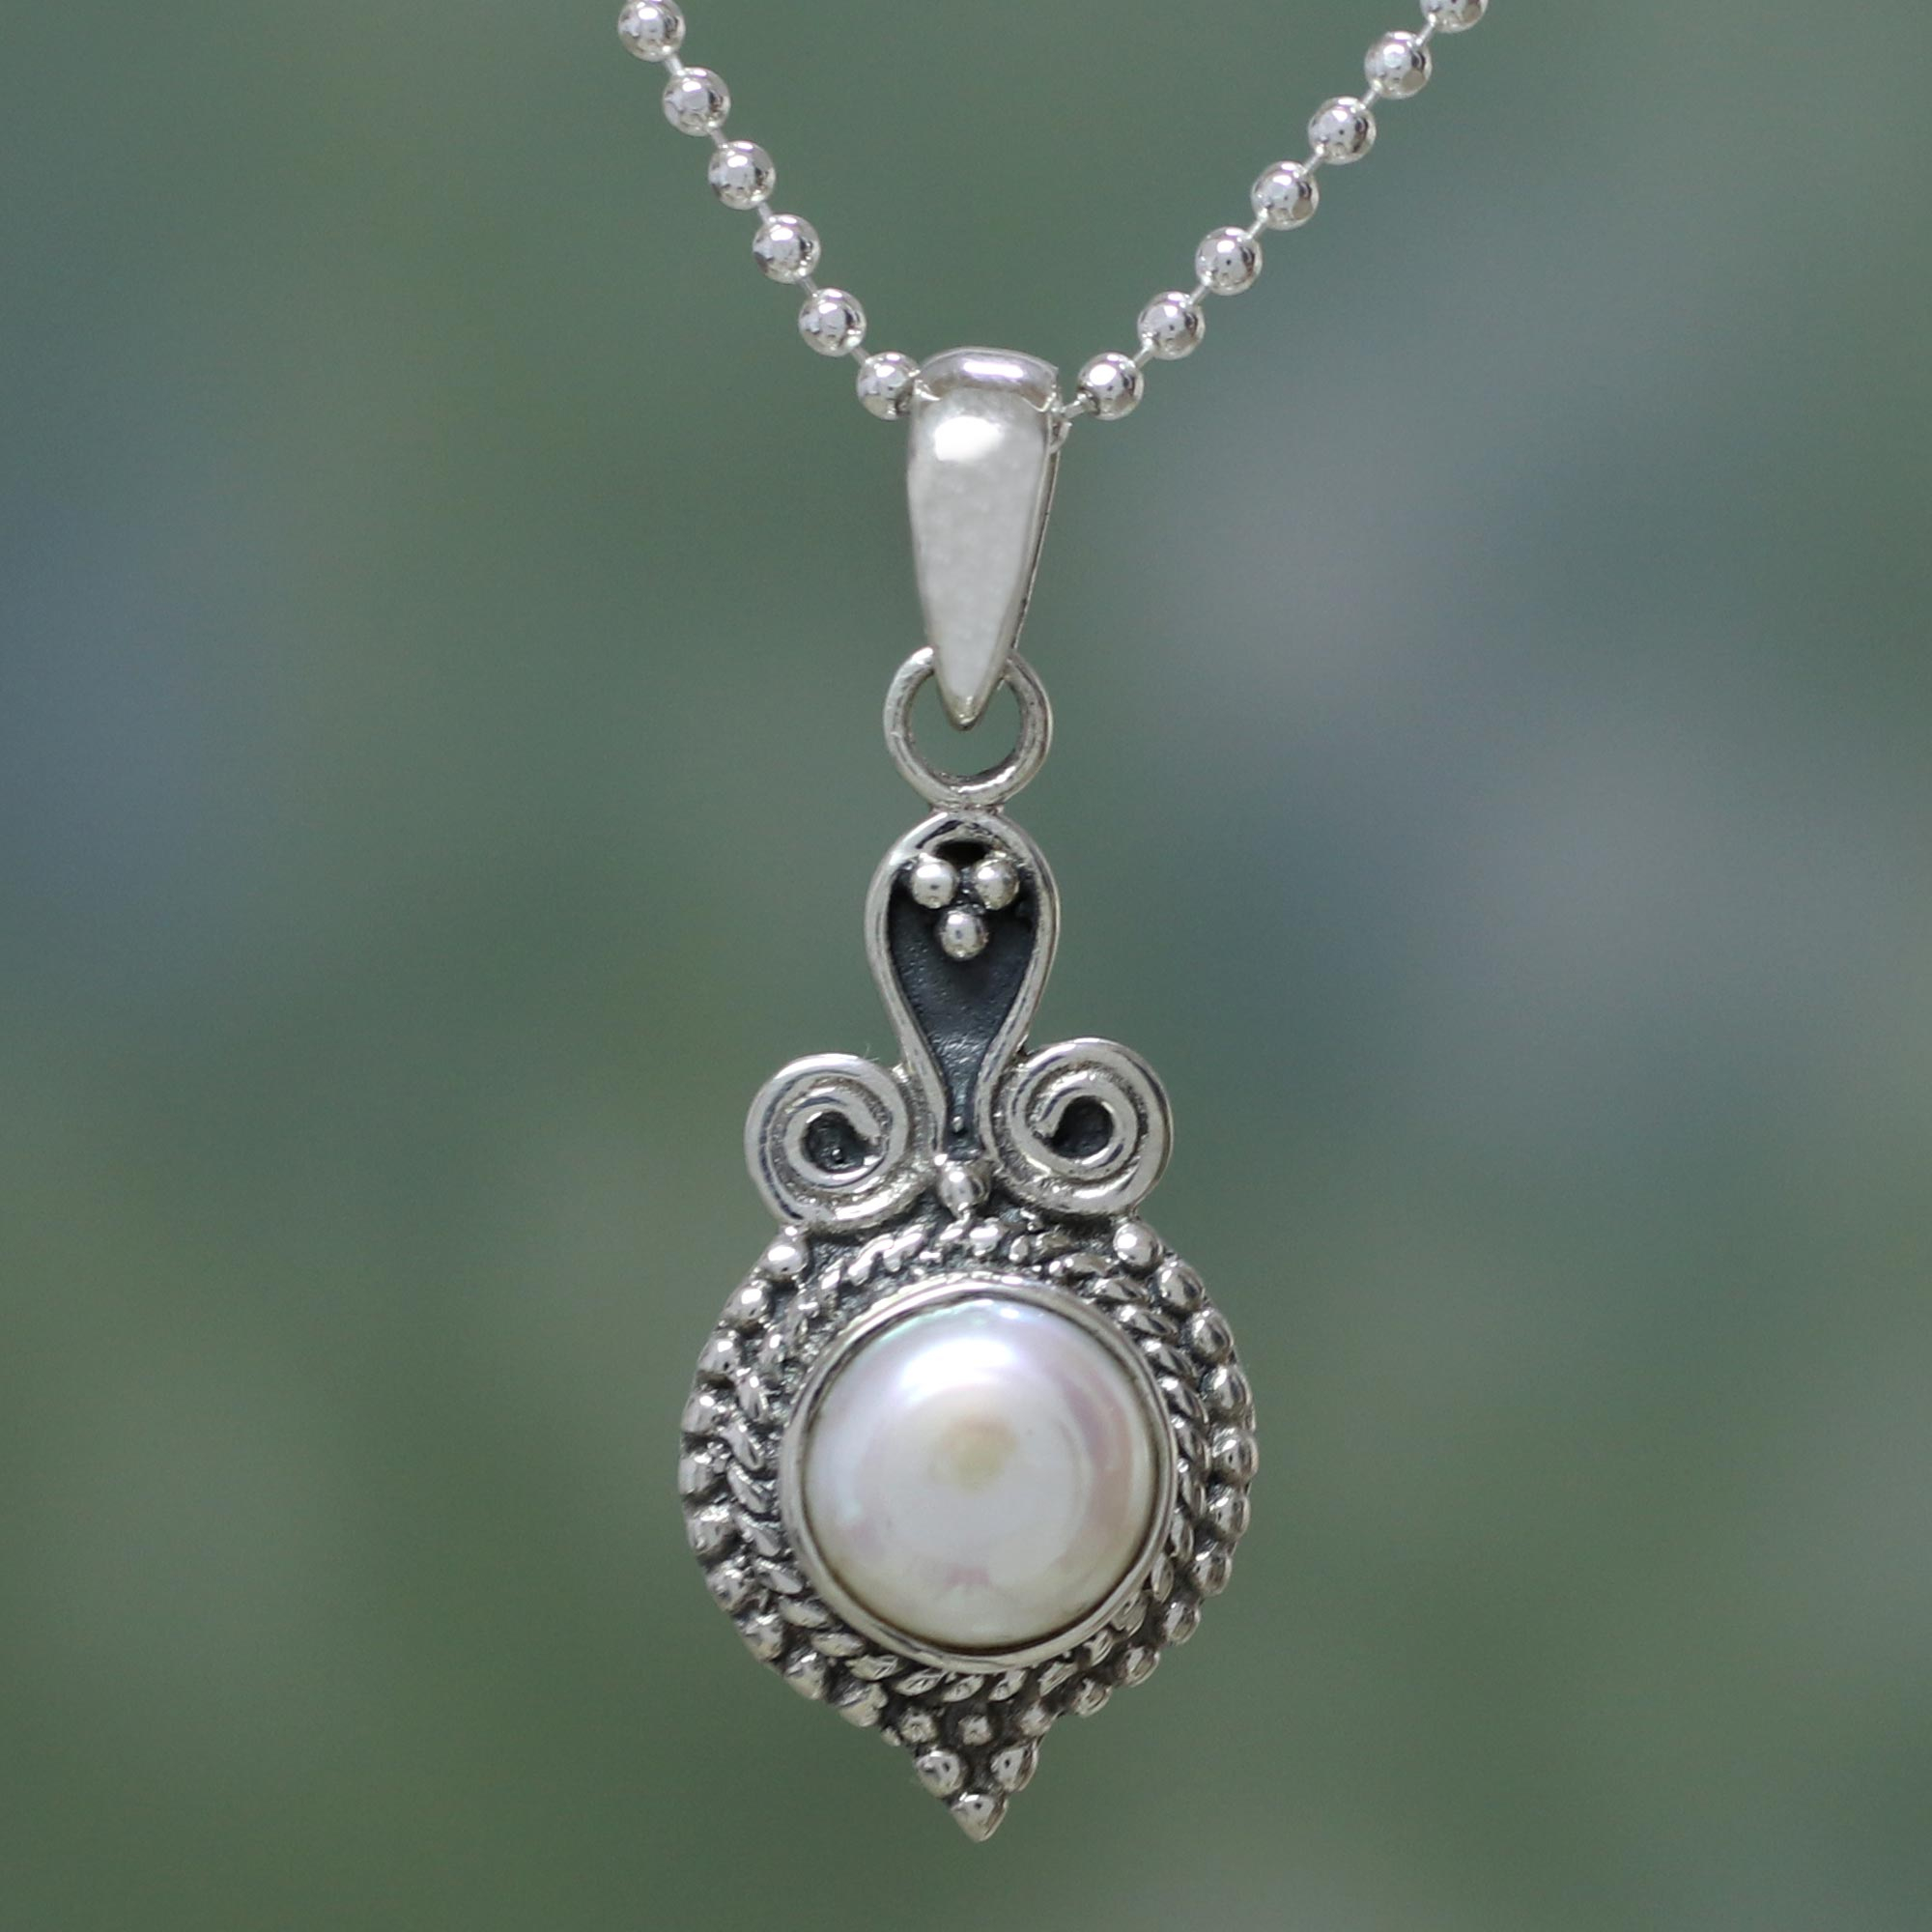 Artisan Crafted Sterling Silver Necklace with Pearl Pendant , 'Cloud of  Desire'